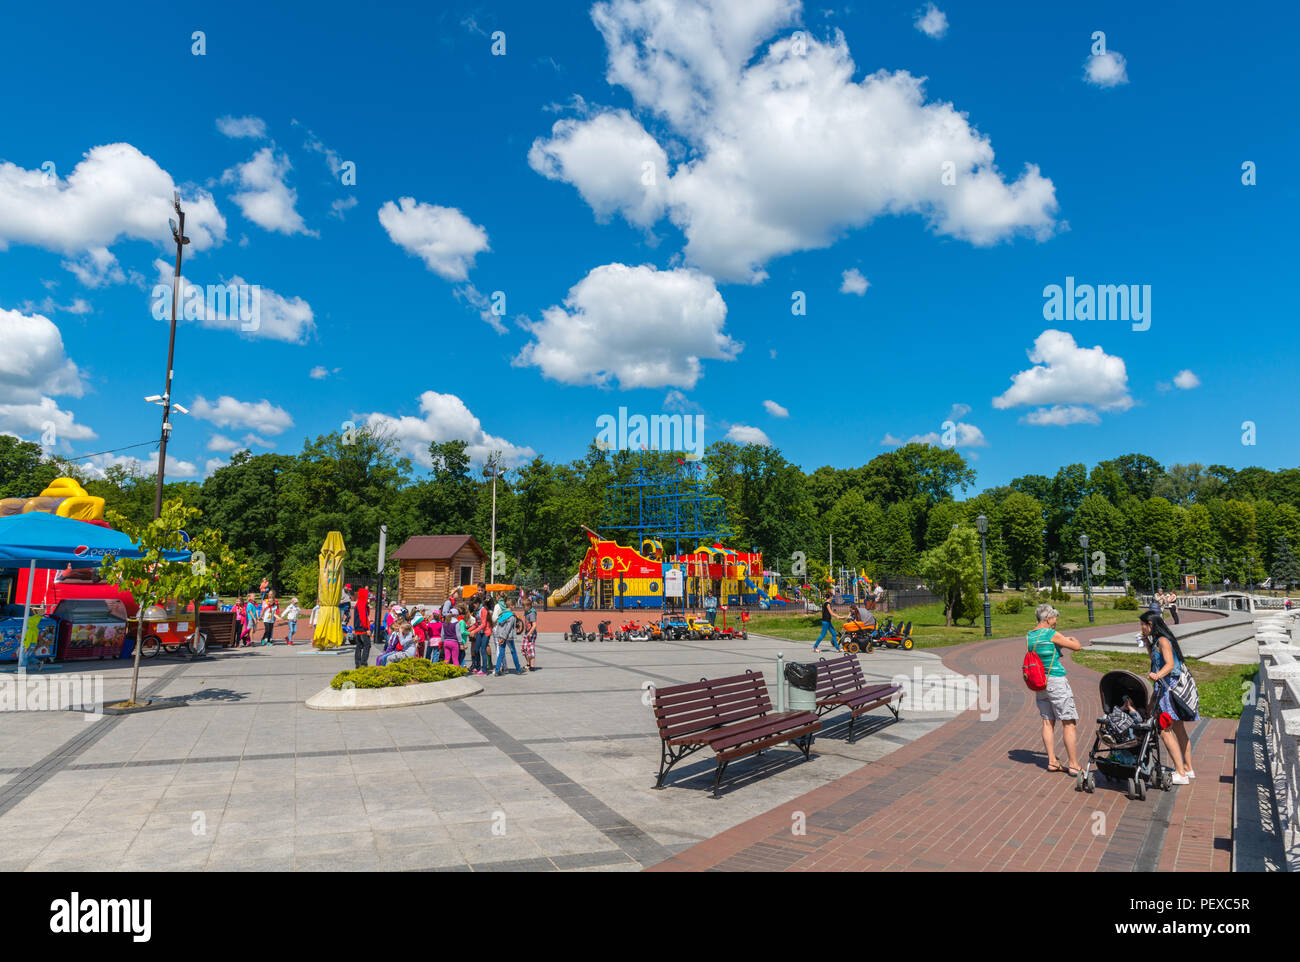 Group of school kids with their leaders, playground, Upper Lake, summer holidays, Kaliningrad, Russia Stock Photo